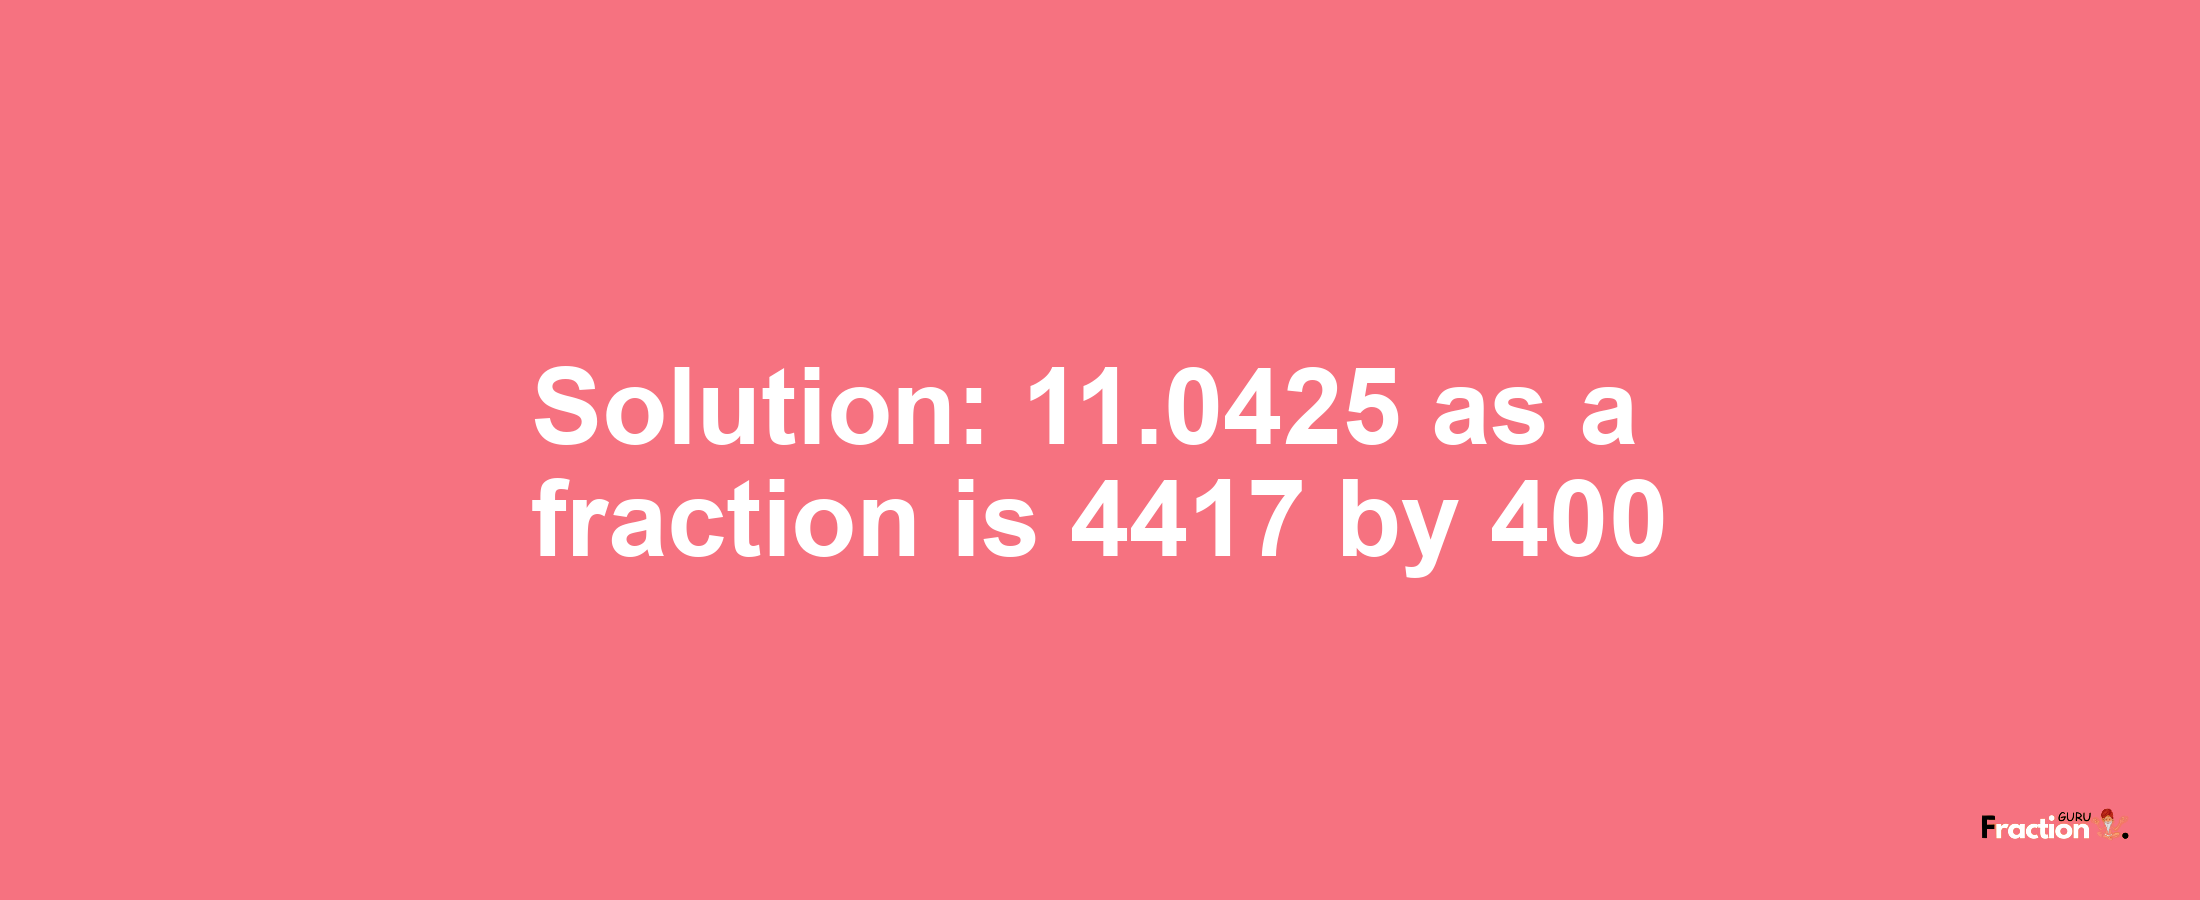 Solution:11.0425 as a fraction is 4417/400